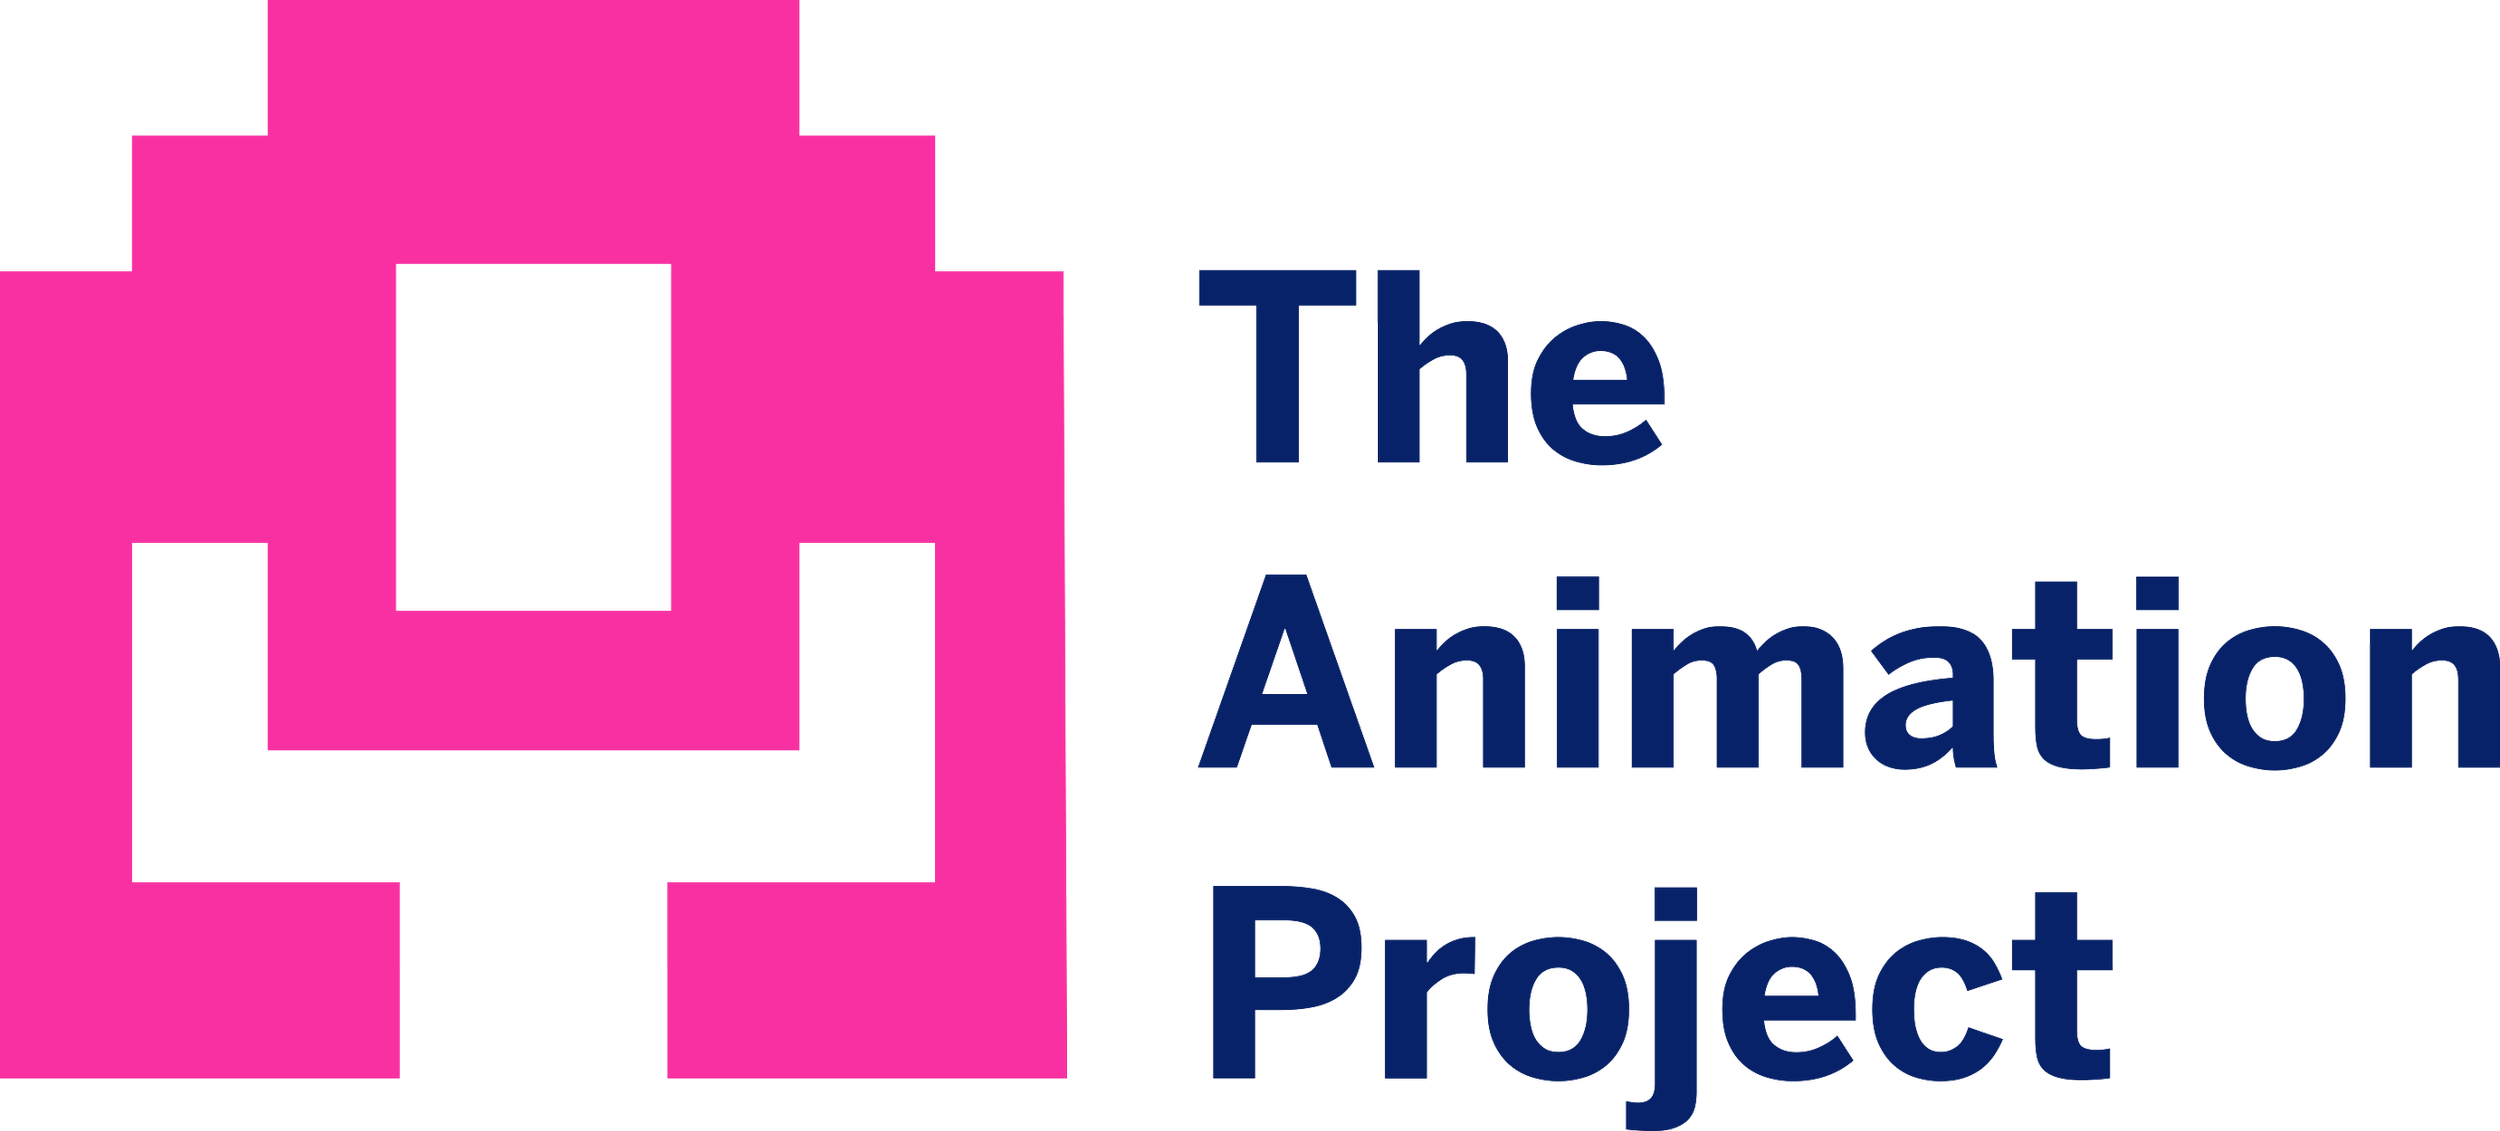 The Animation Project